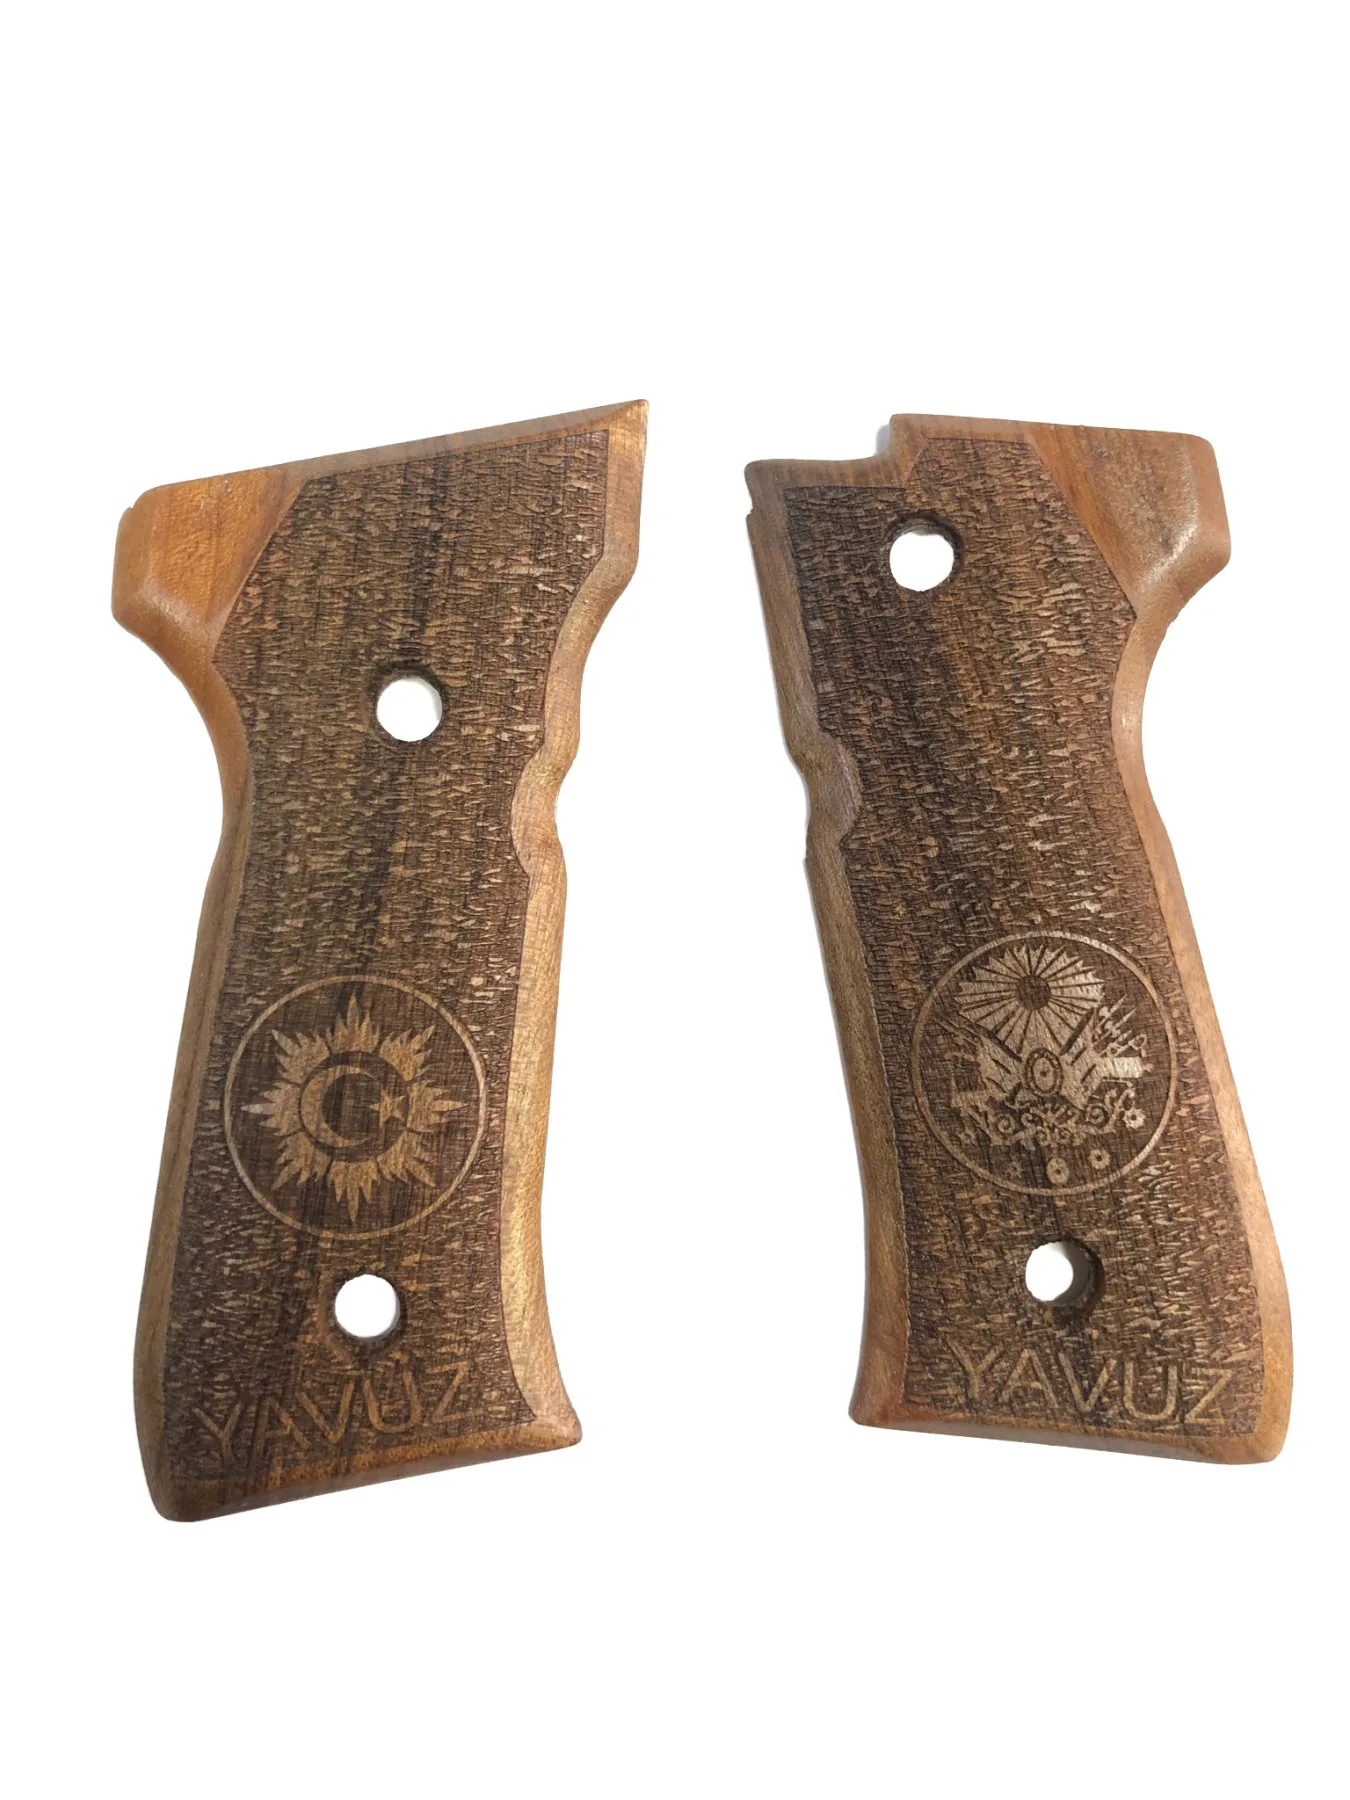 

Yavuz 16 - Beretta F92 Compatible the Moon the stars and Starboard Embroidered Wooden Grip